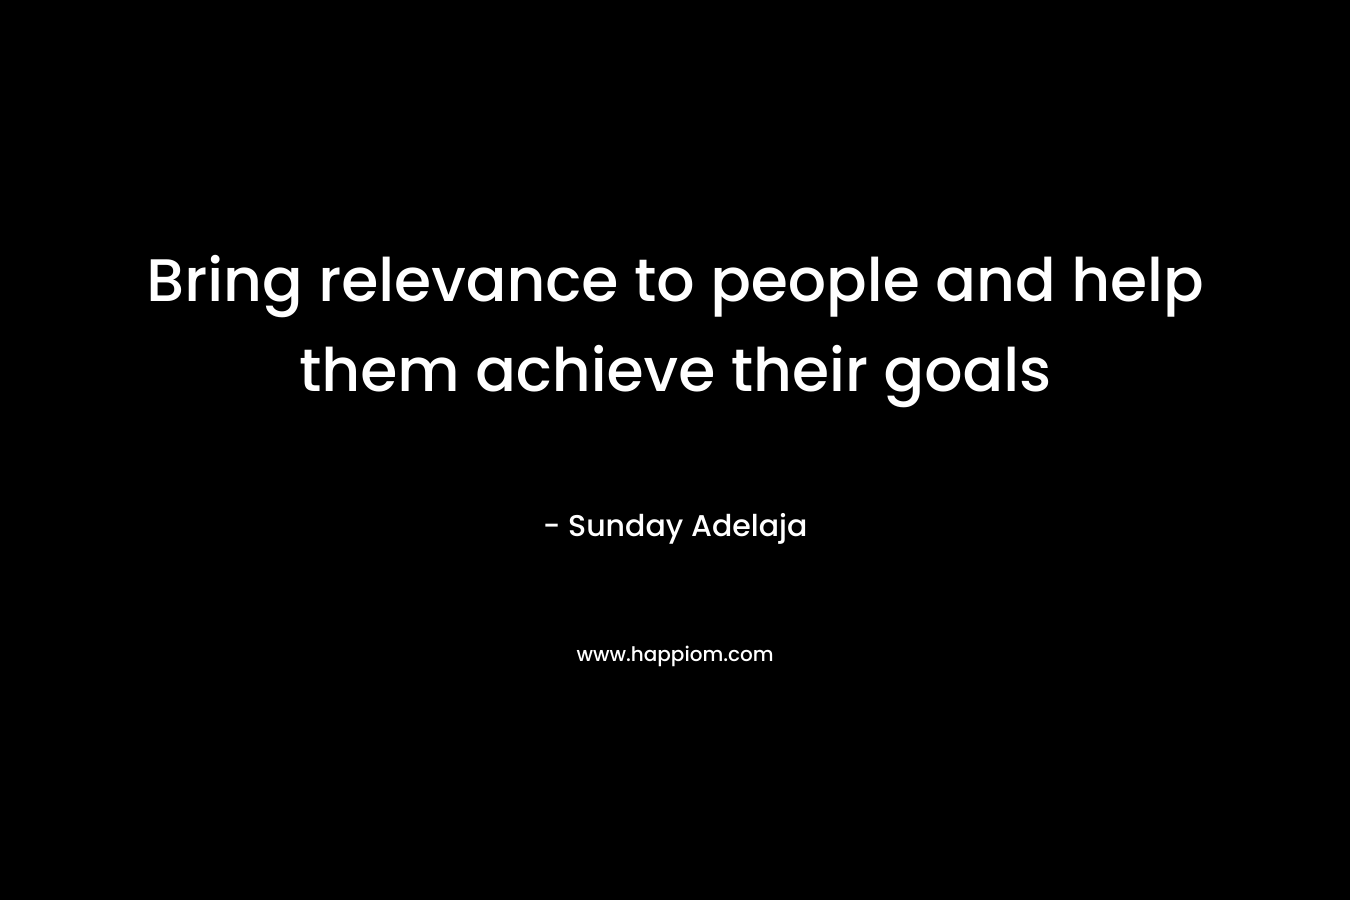 Bring relevance to people and help them achieve their goals